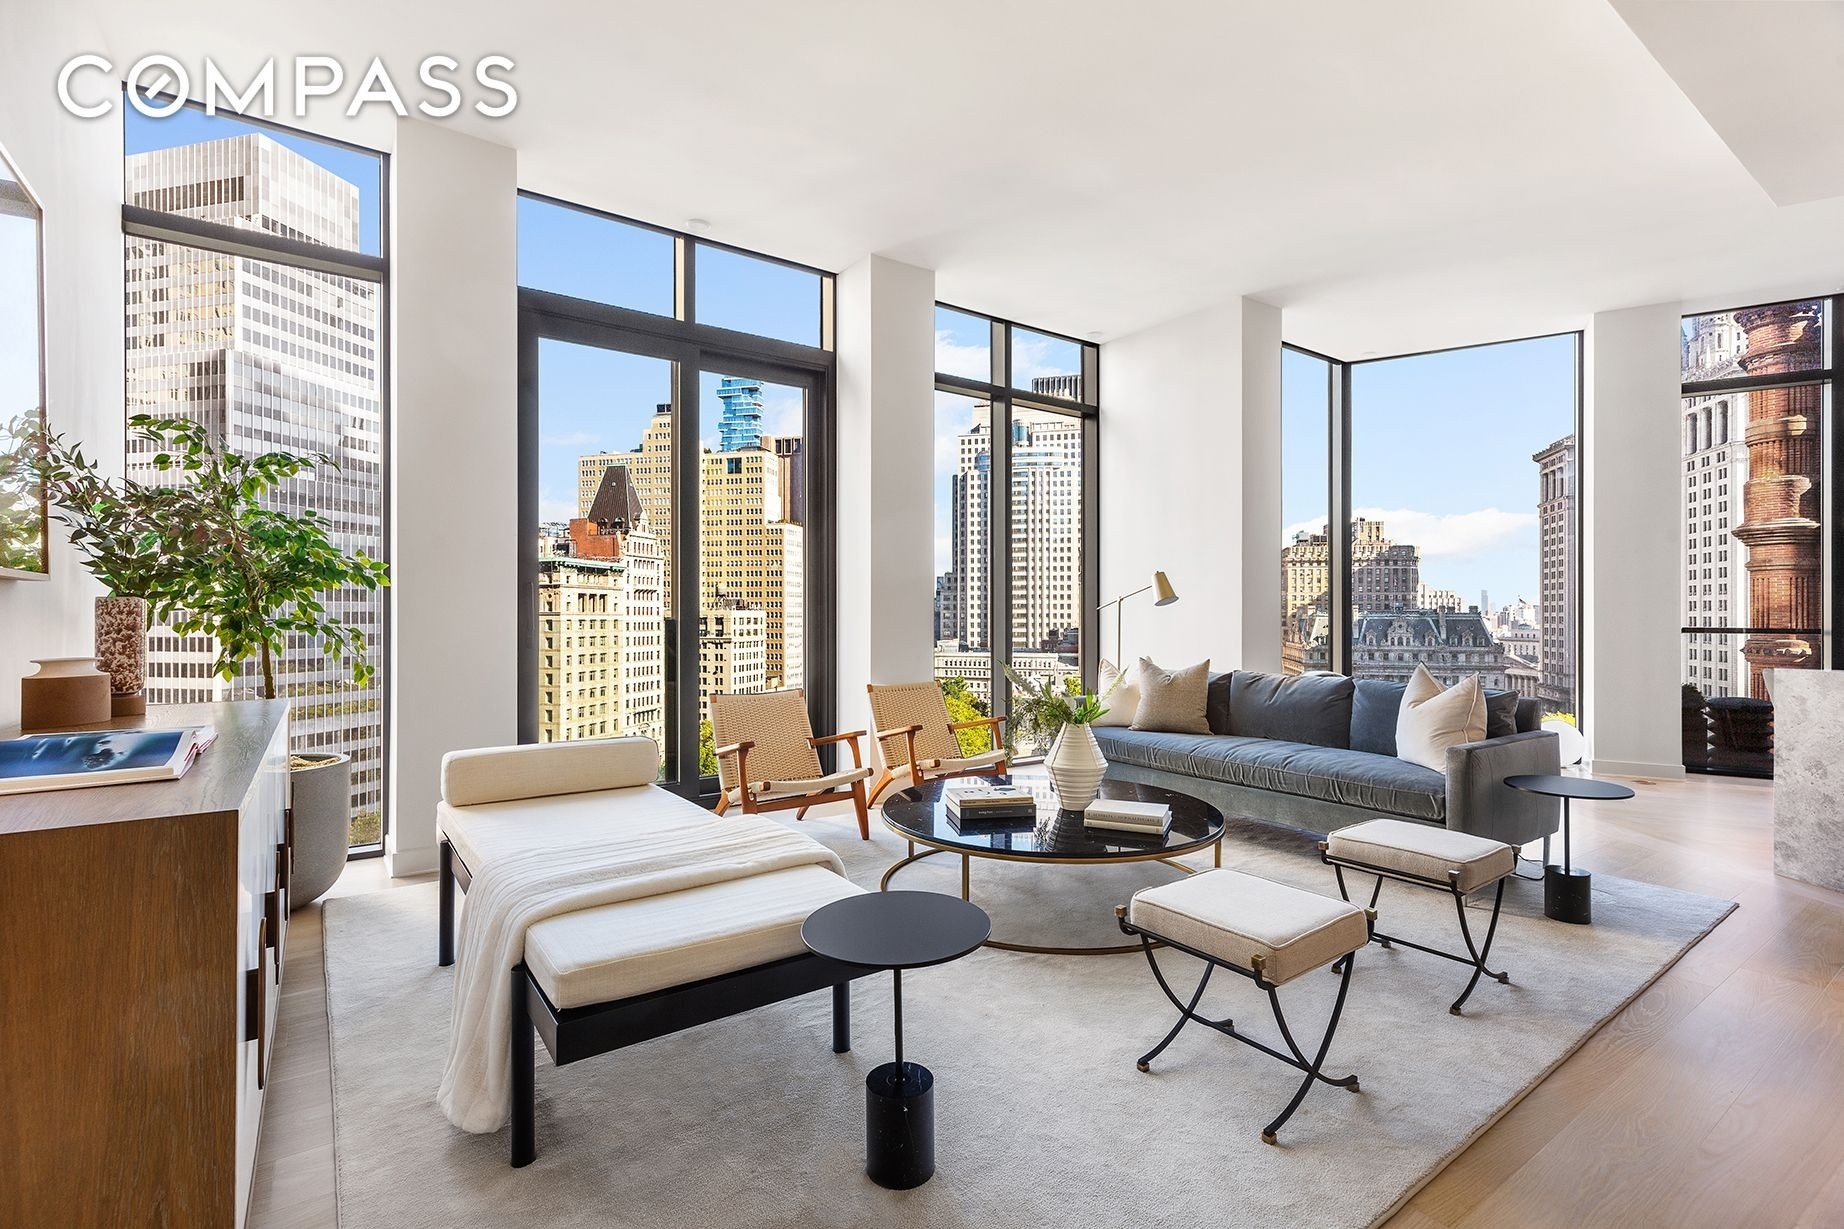 Condominium for Sale at No. 33 Park Row, 33 PARK ROW, 11A Financial District, New York, New York 10038